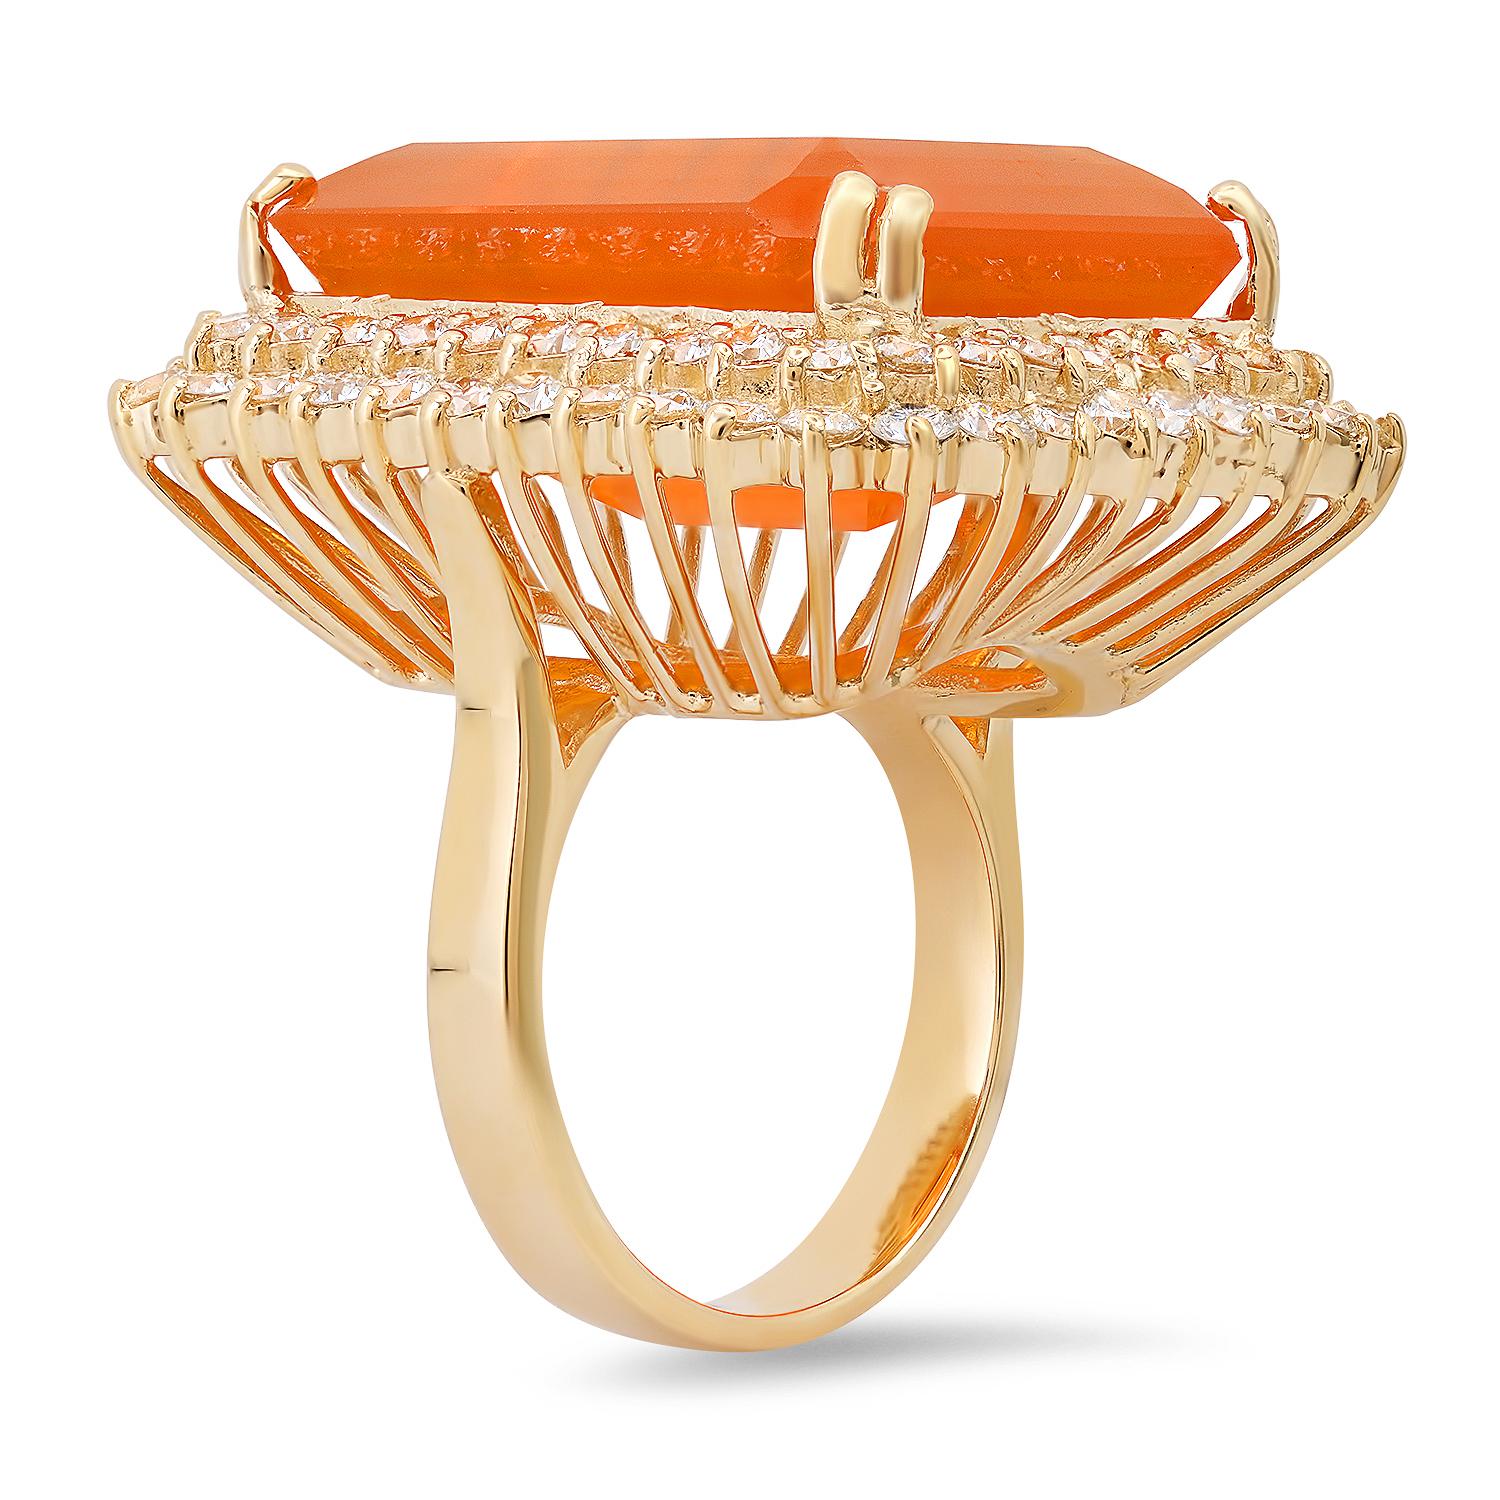 14K Yellow Gold Setting with 20.89ct Fire Opal and 2.70ct Diamond Ring